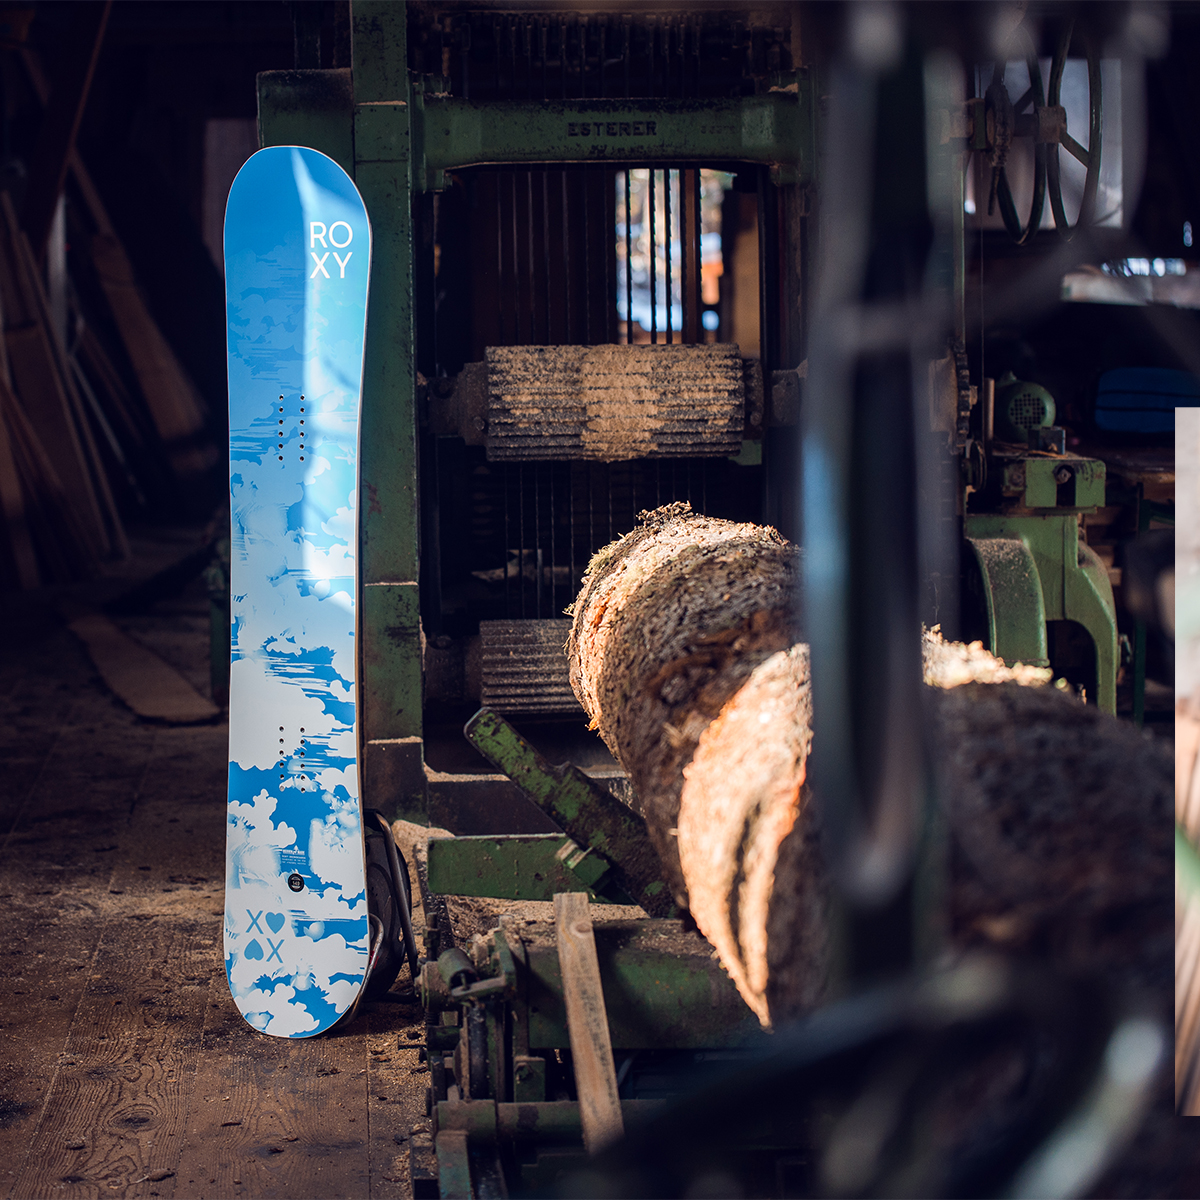 Sun & Ski Sports on X: Ride like an Olympian with the ROXY Women's XOXO  Pro Snowboard, inspired by the legendary Chloe Kim 🏂✨ Crafted in the PNW,  this board will bring